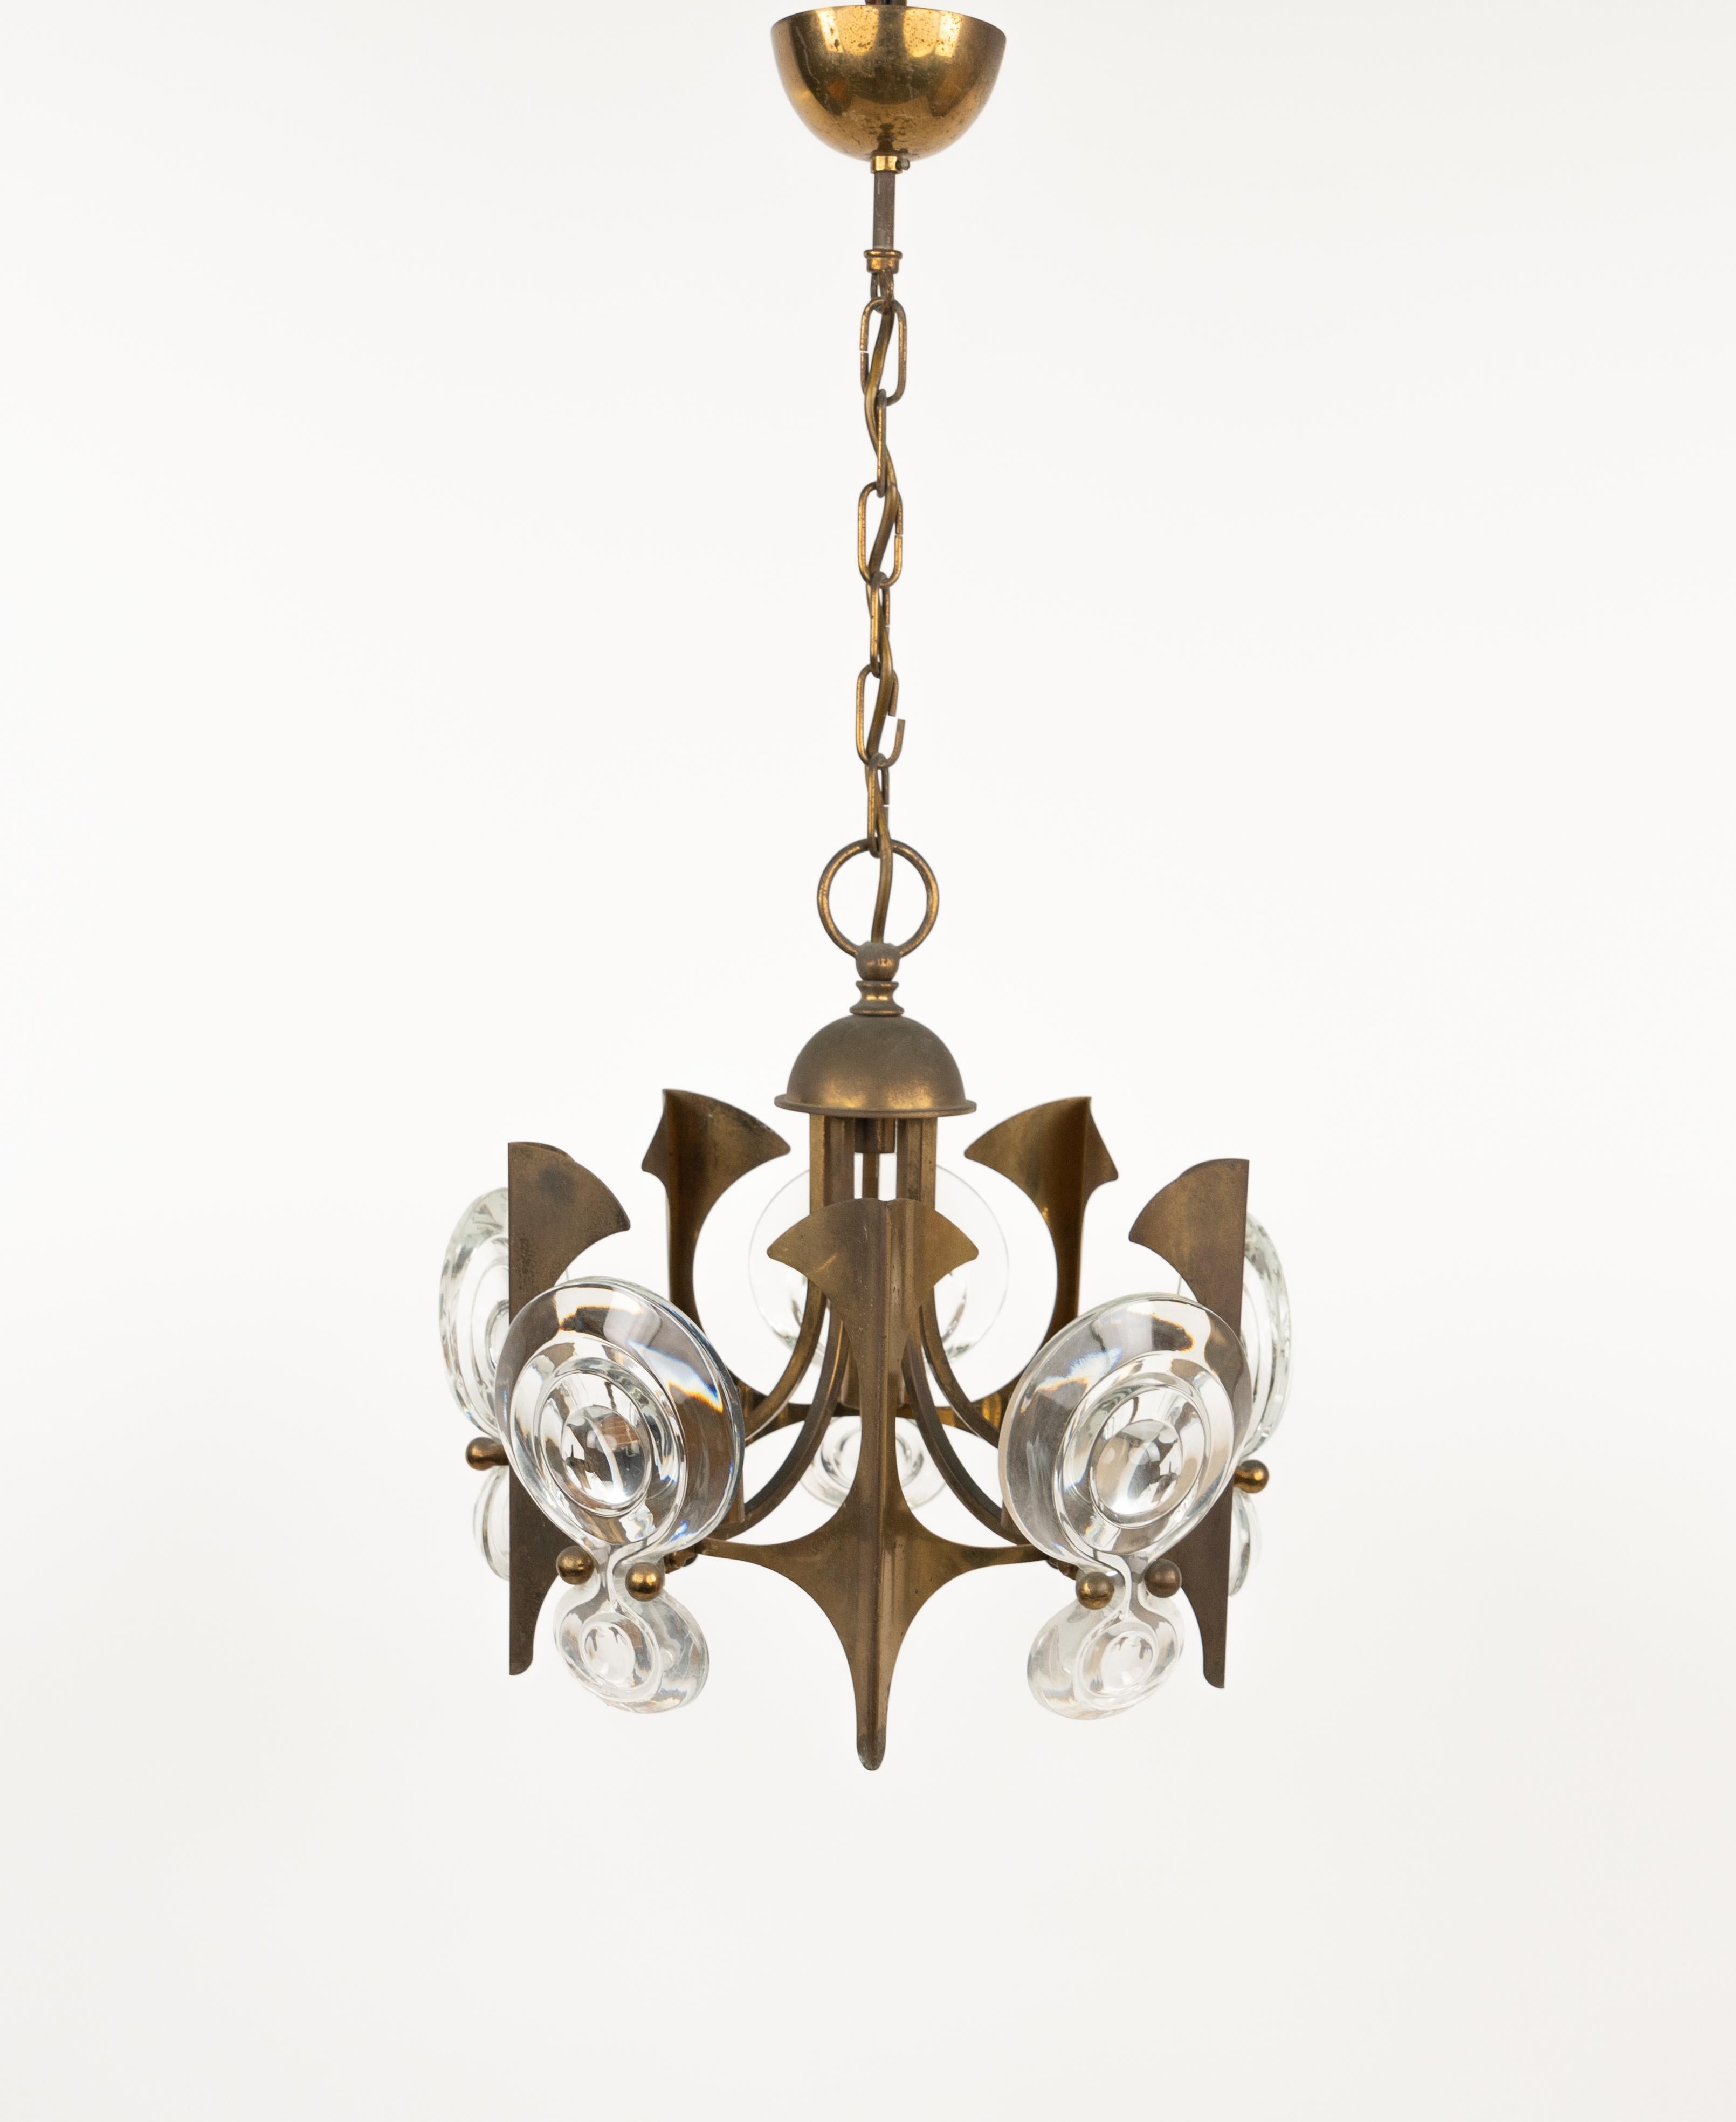 Metal Midcentury Chandelier Brass and Glass by Oscar Torlasco, Italy 1960s For Sale